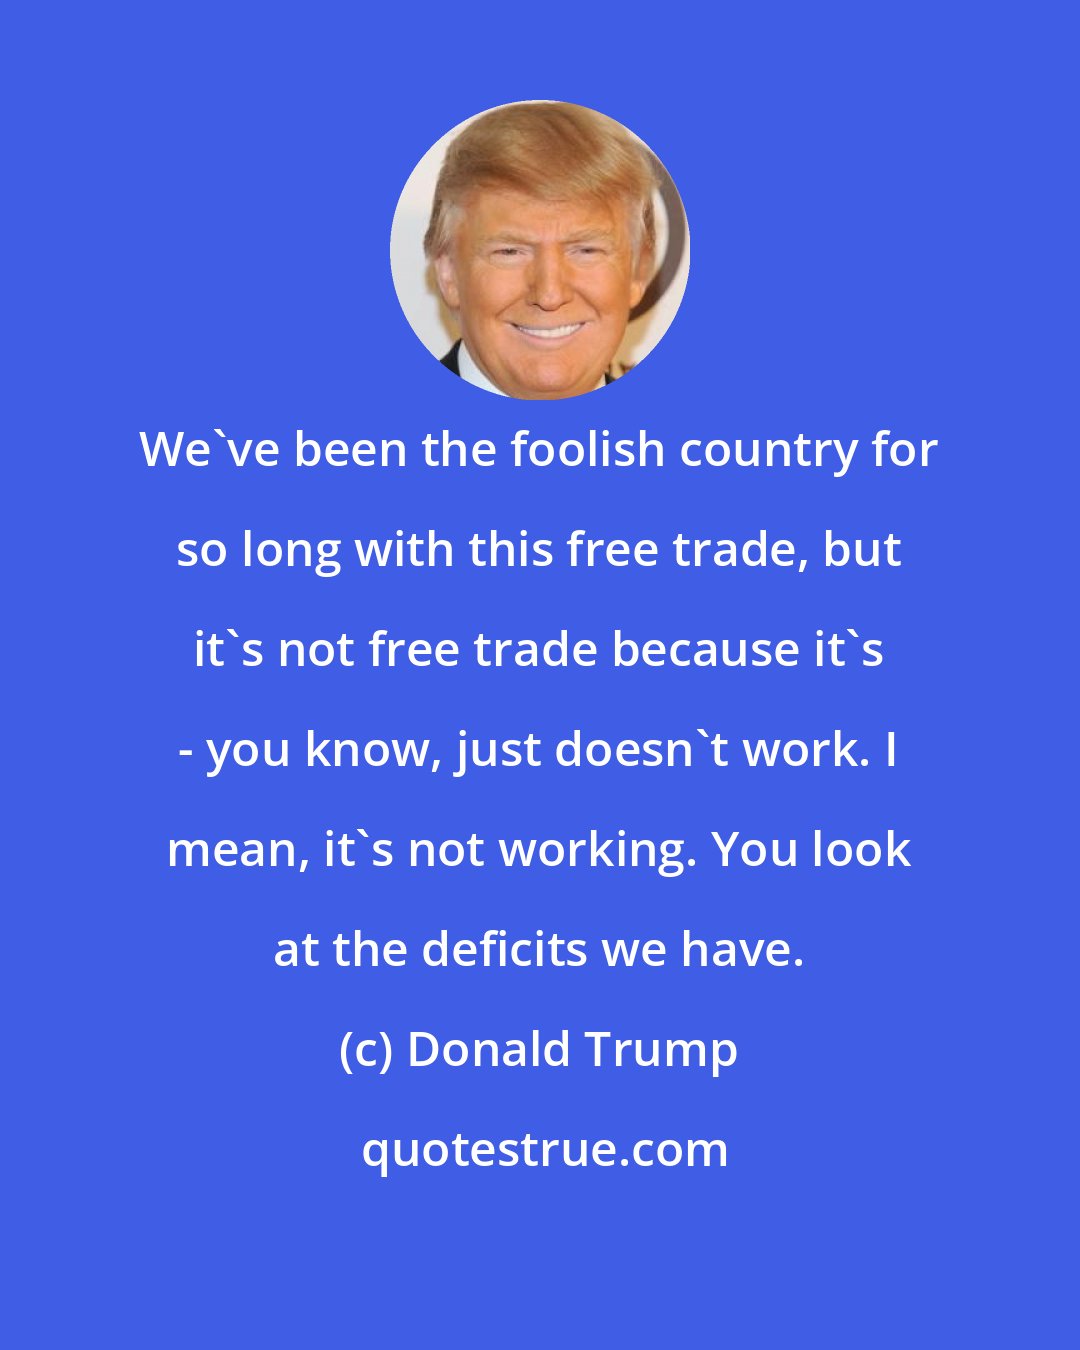 Donald Trump: We've been the foolish country for so long with this free trade, but it's not free trade because it's - you know, just doesn't work. I mean, it's not working. You look at the deficits we have.